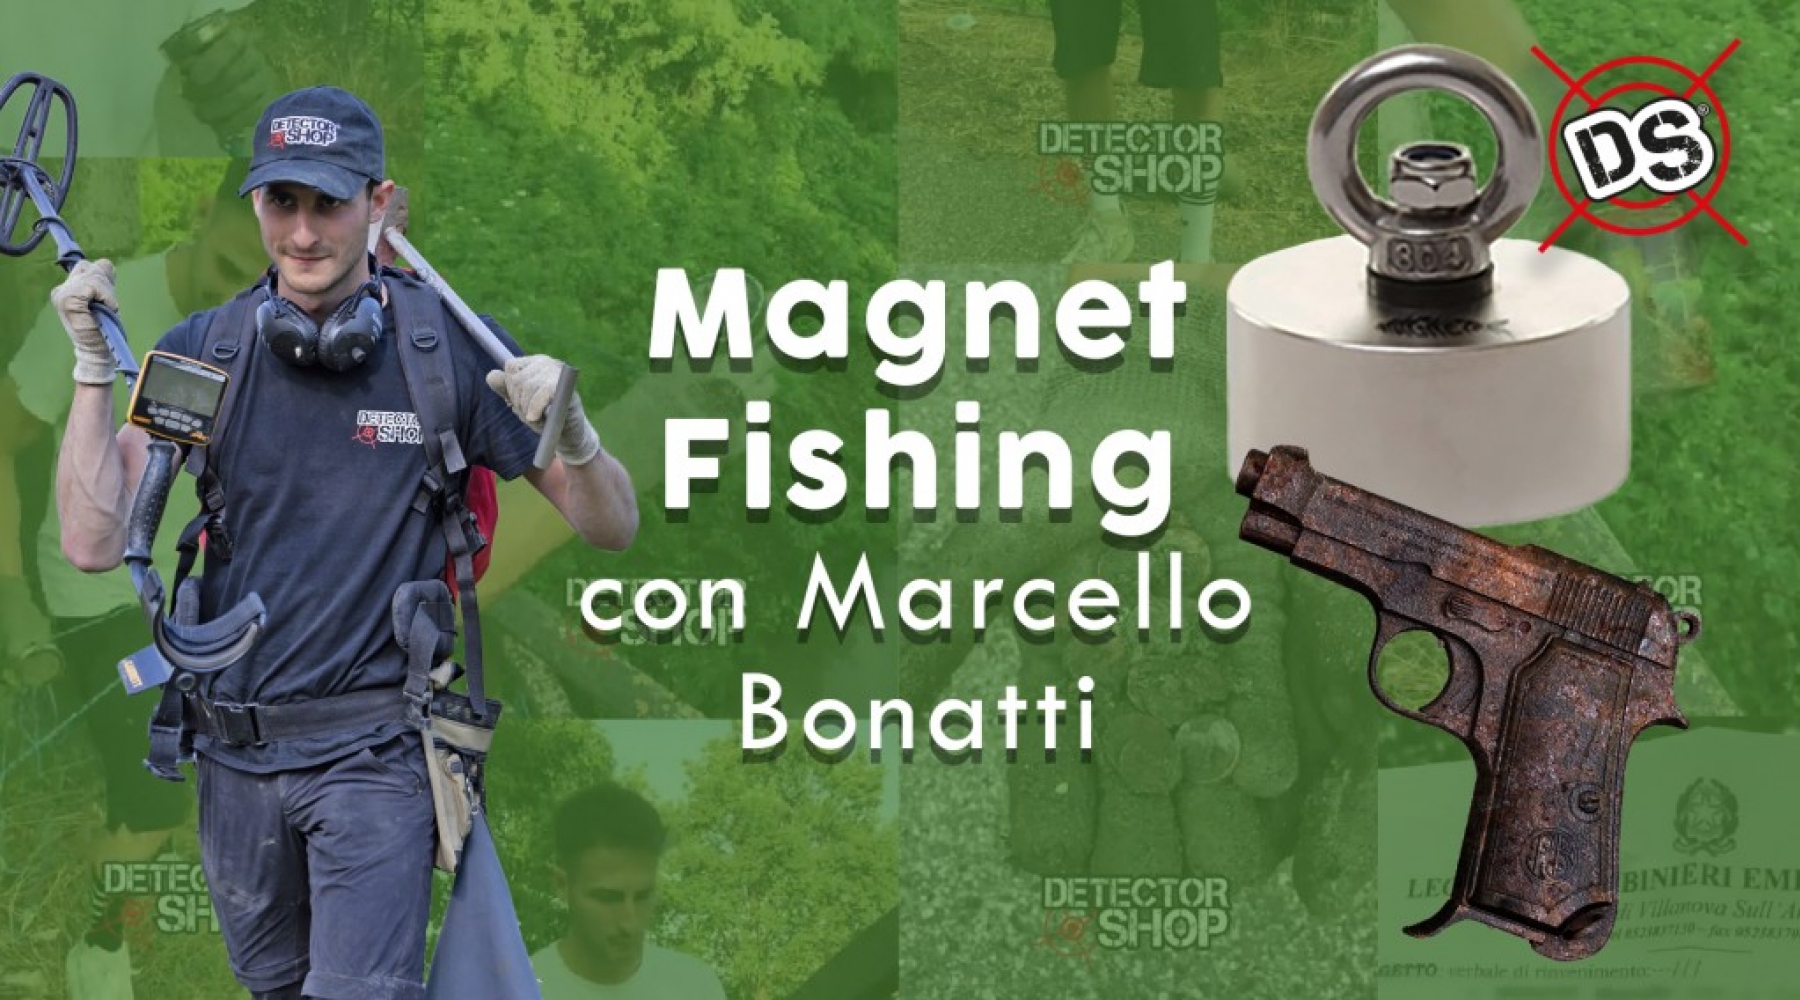 Magnet fishing, a gun came up from the creek 